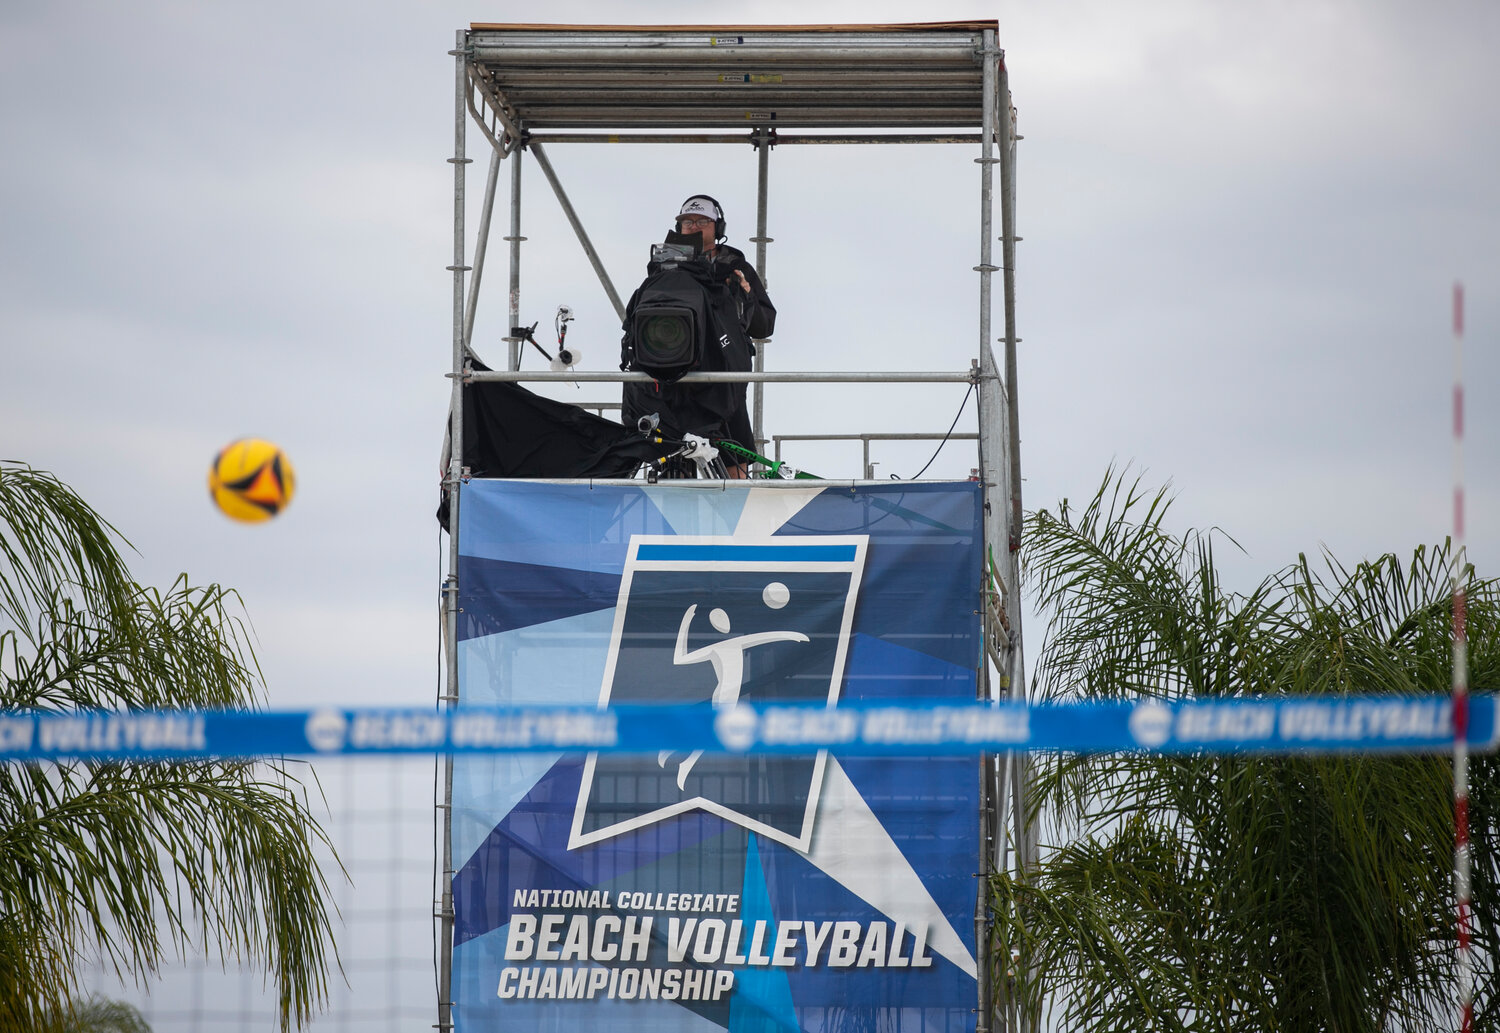 Between the teams and their families, ESPN production crews and tournament operators, the three-day beach volleyball championship tournament produced around 2,000 hotel stays and $1.5 million in economic impact on the City of Gulf Shores according to Recreation and Cultural Affairs Director Grant Brown.